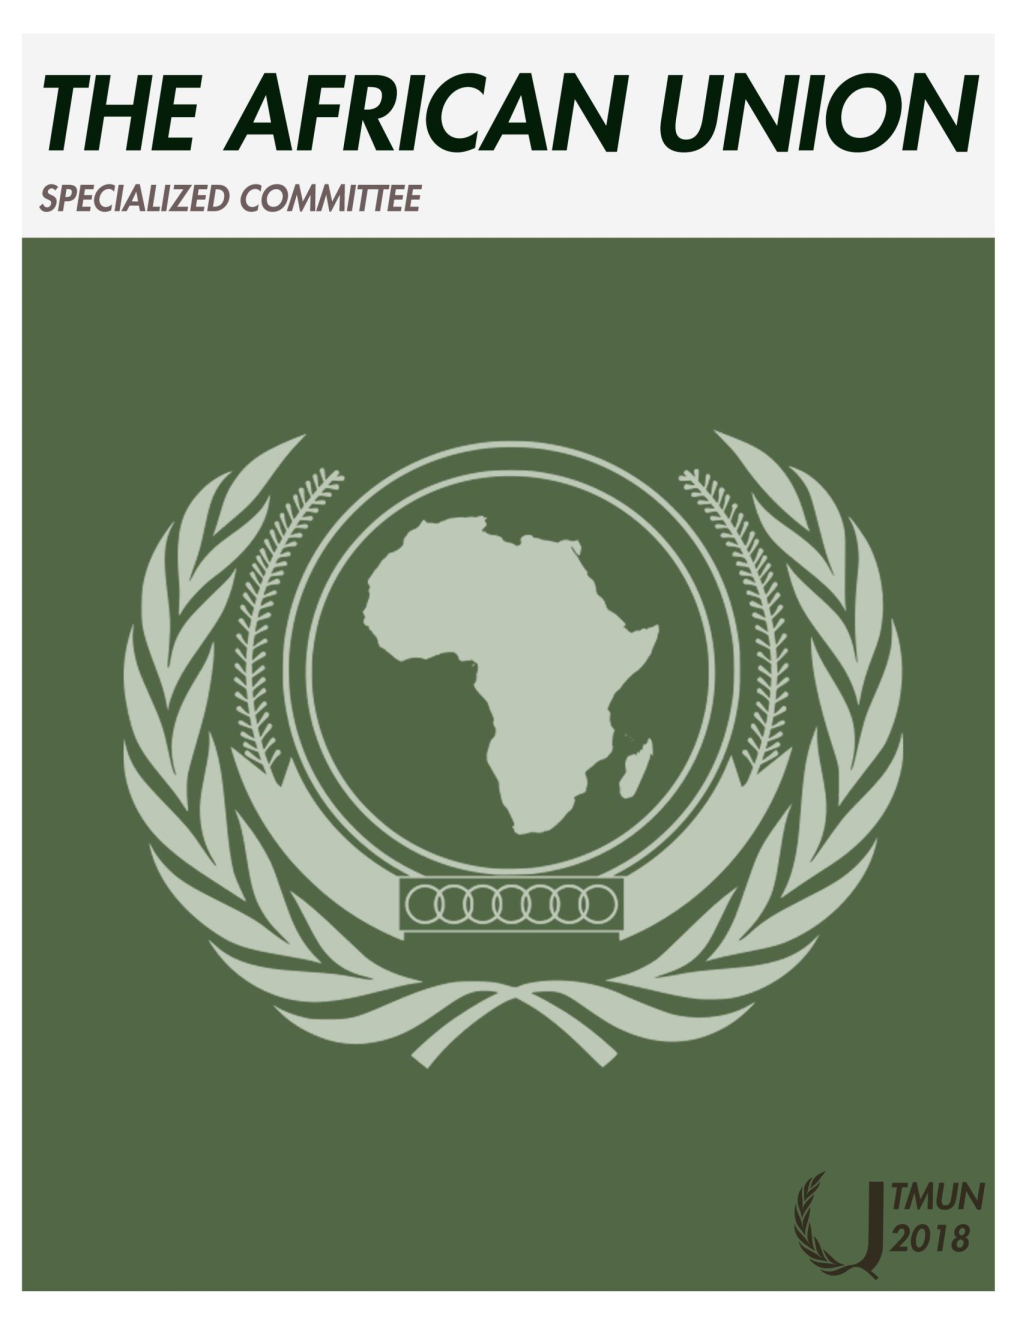 The African Union